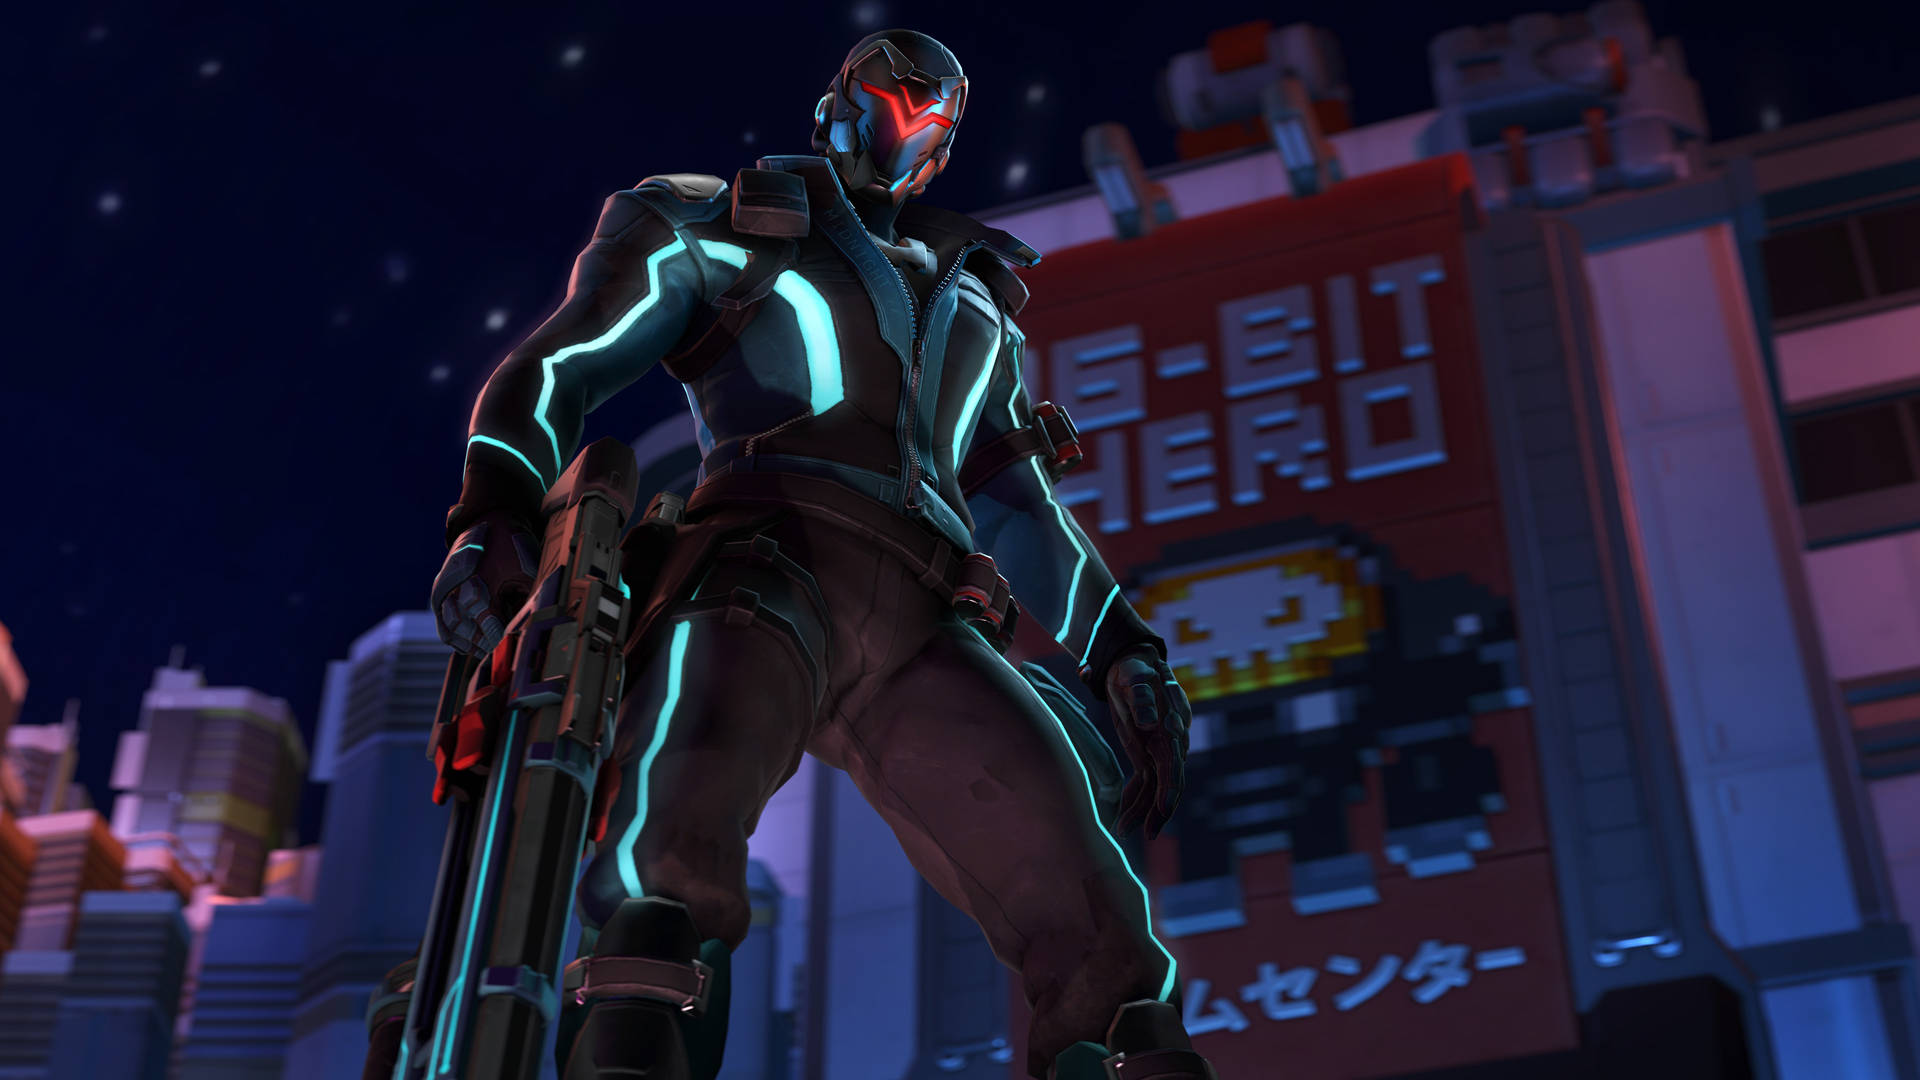 Overwatch 4k - A Display Of Power - Soldier 76 In City Background